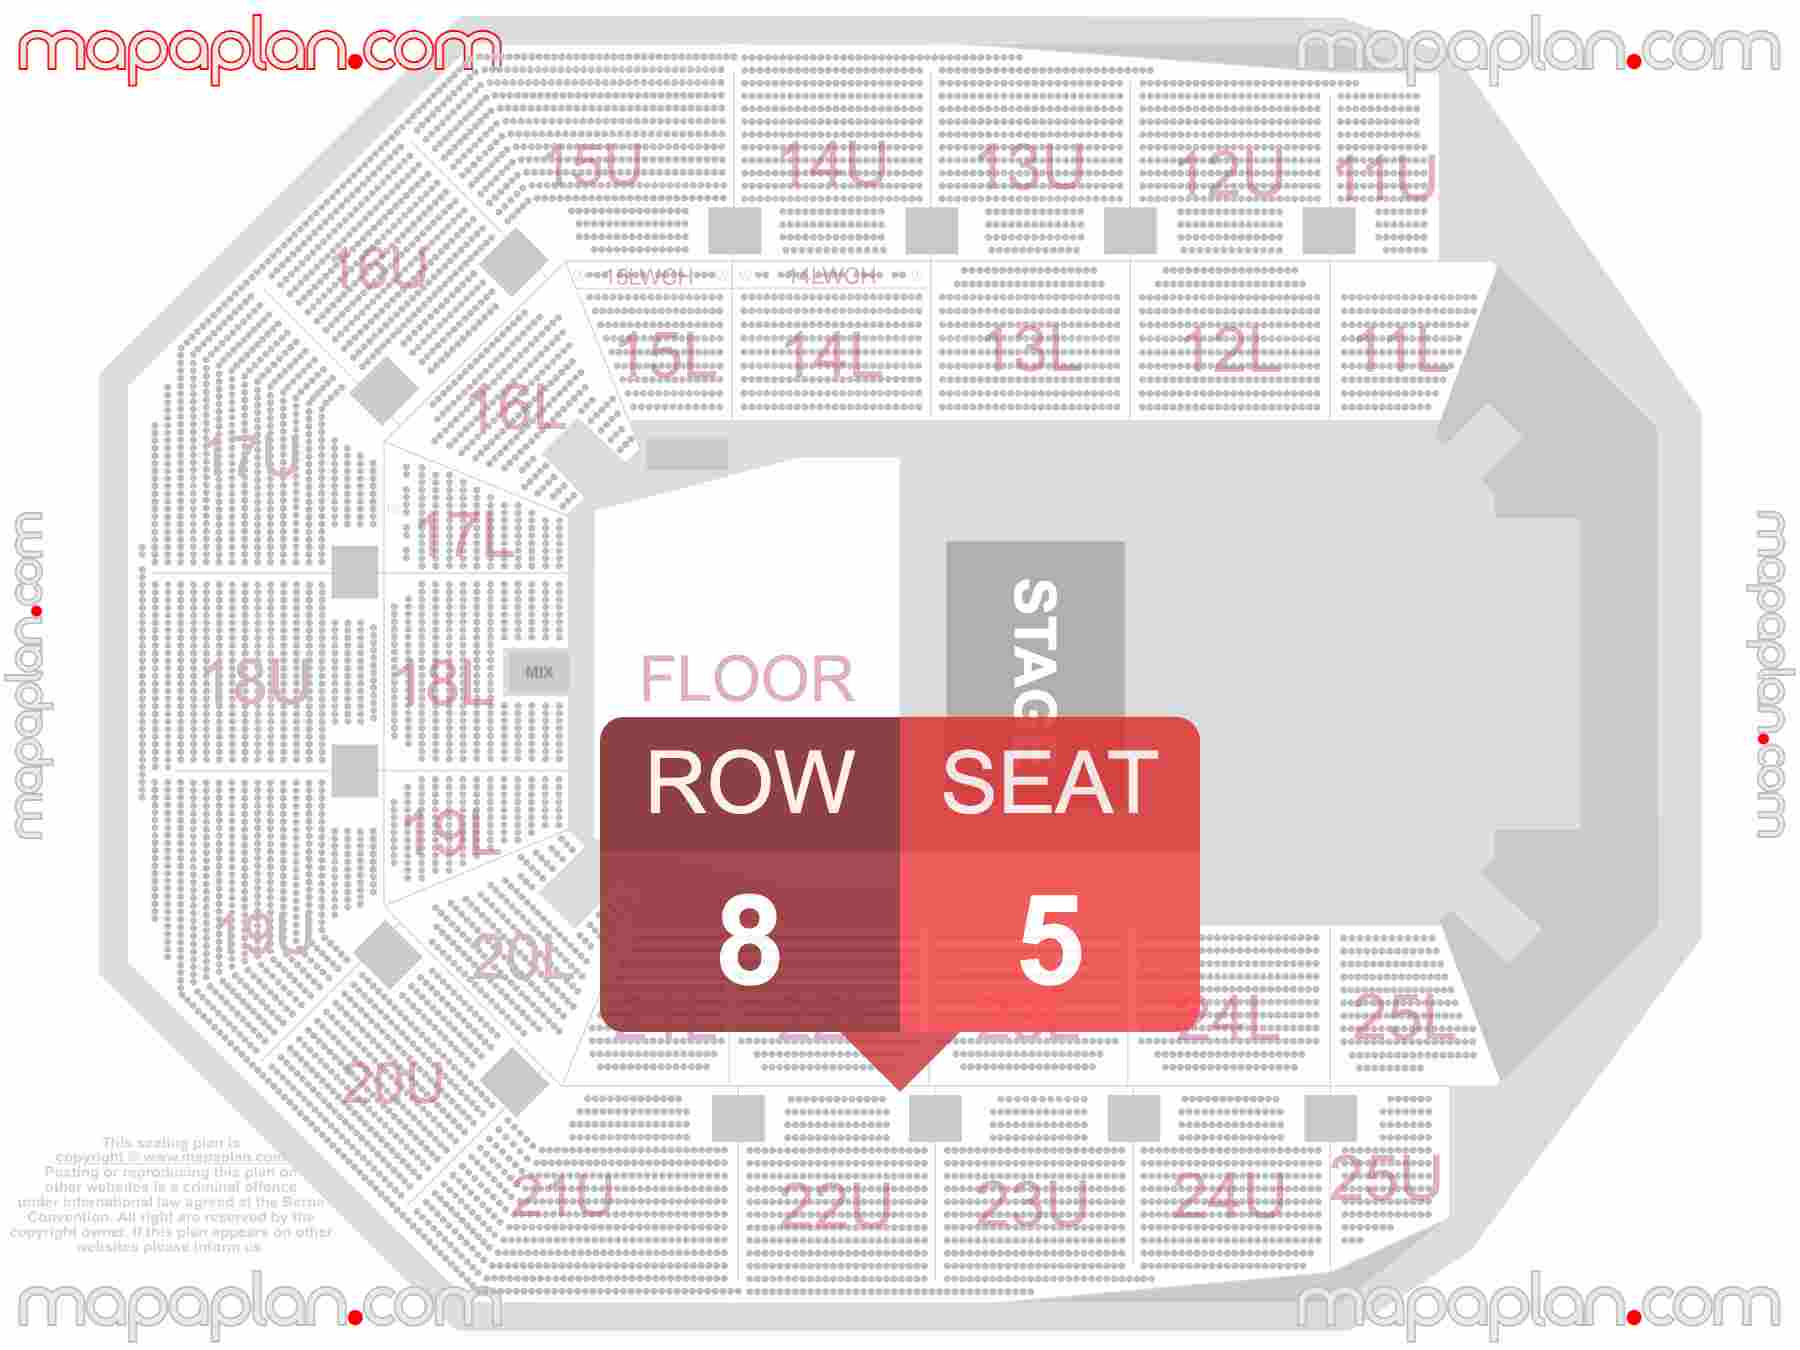 Auckland Spark Arena seating map Concert half hall layout seating map with exact section numbers showing best rows and seats selection 3d layout - Best interactive seat finder tool with precise detailed location data